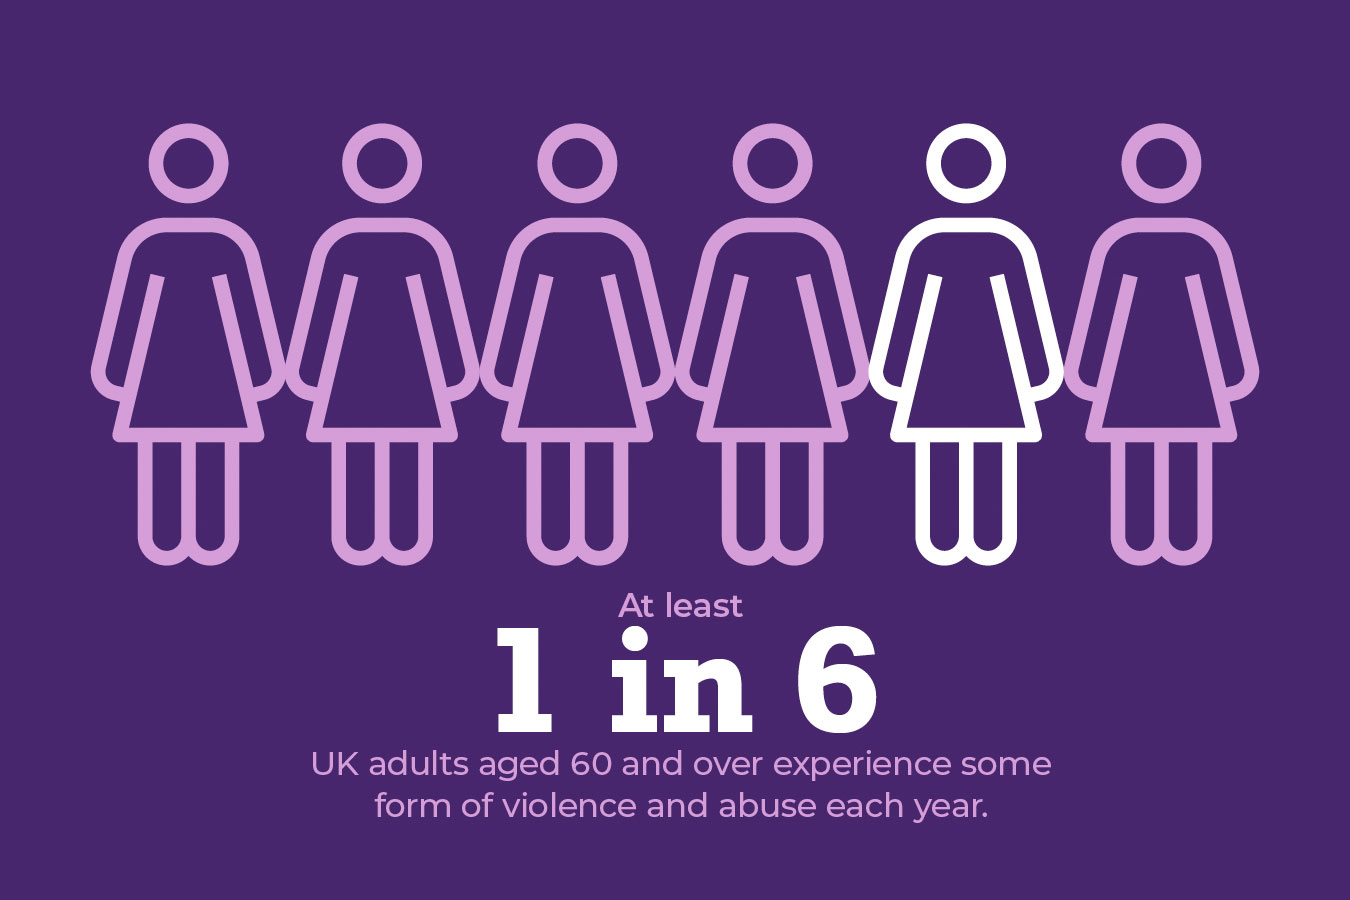 Statistic At least 1 in 6 UK adults aged 60 and over experience some form of violence and abuse each year.